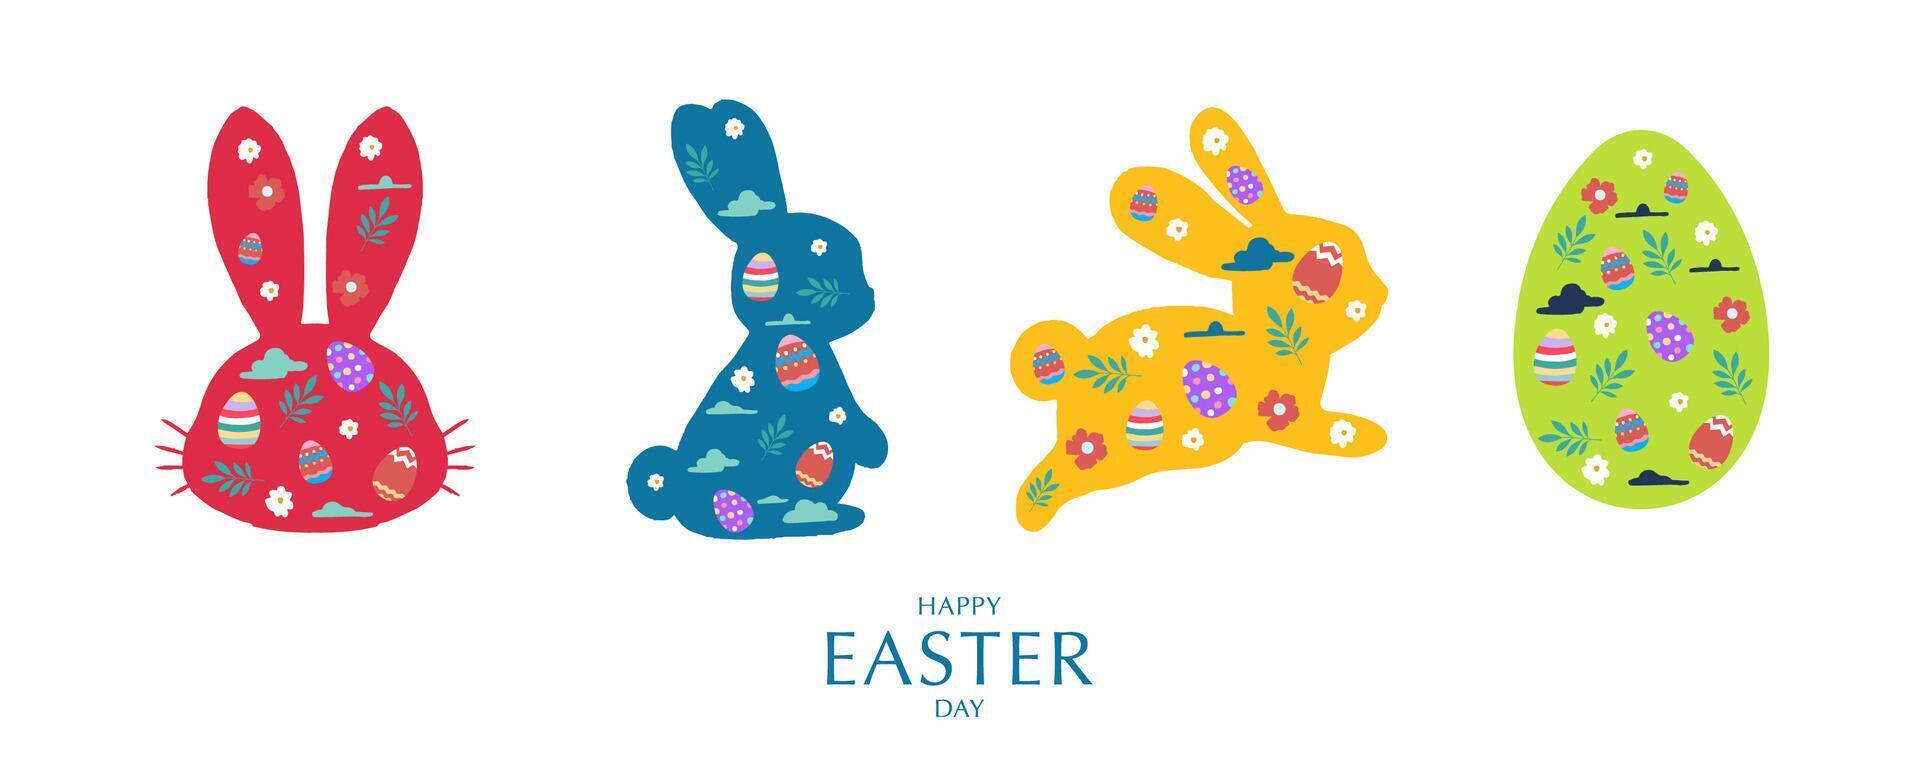 Collection of easter background set with silhouette style Editable vector illustration for horizontal banner